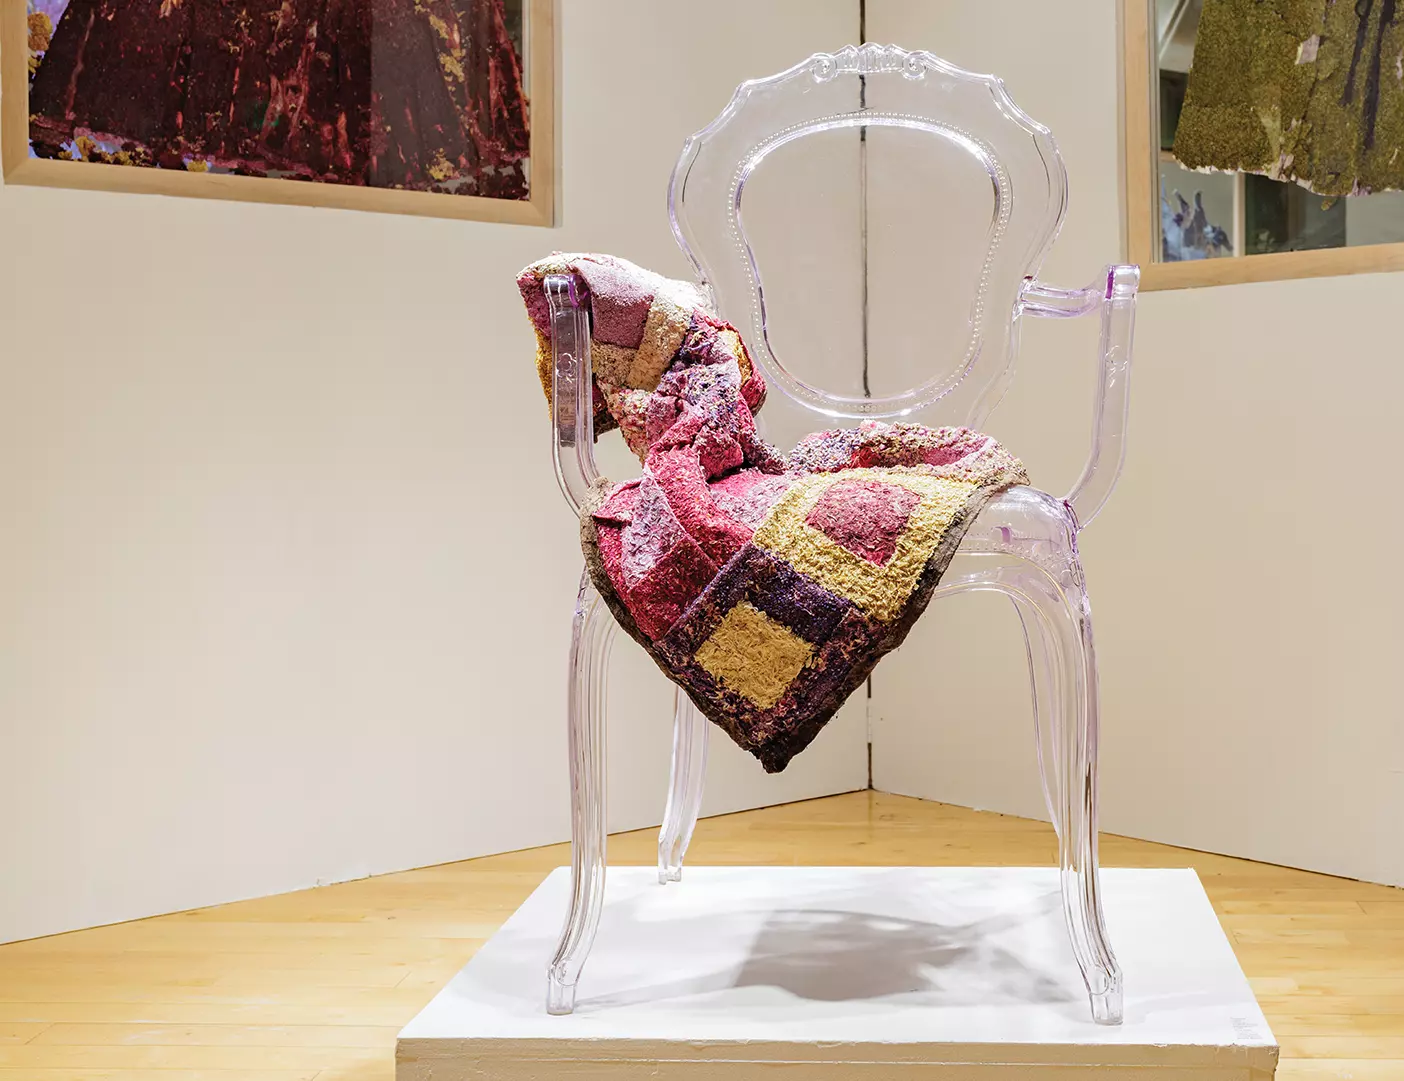 A quilt made from dried flowers is draped over a clear chair in an art gallery